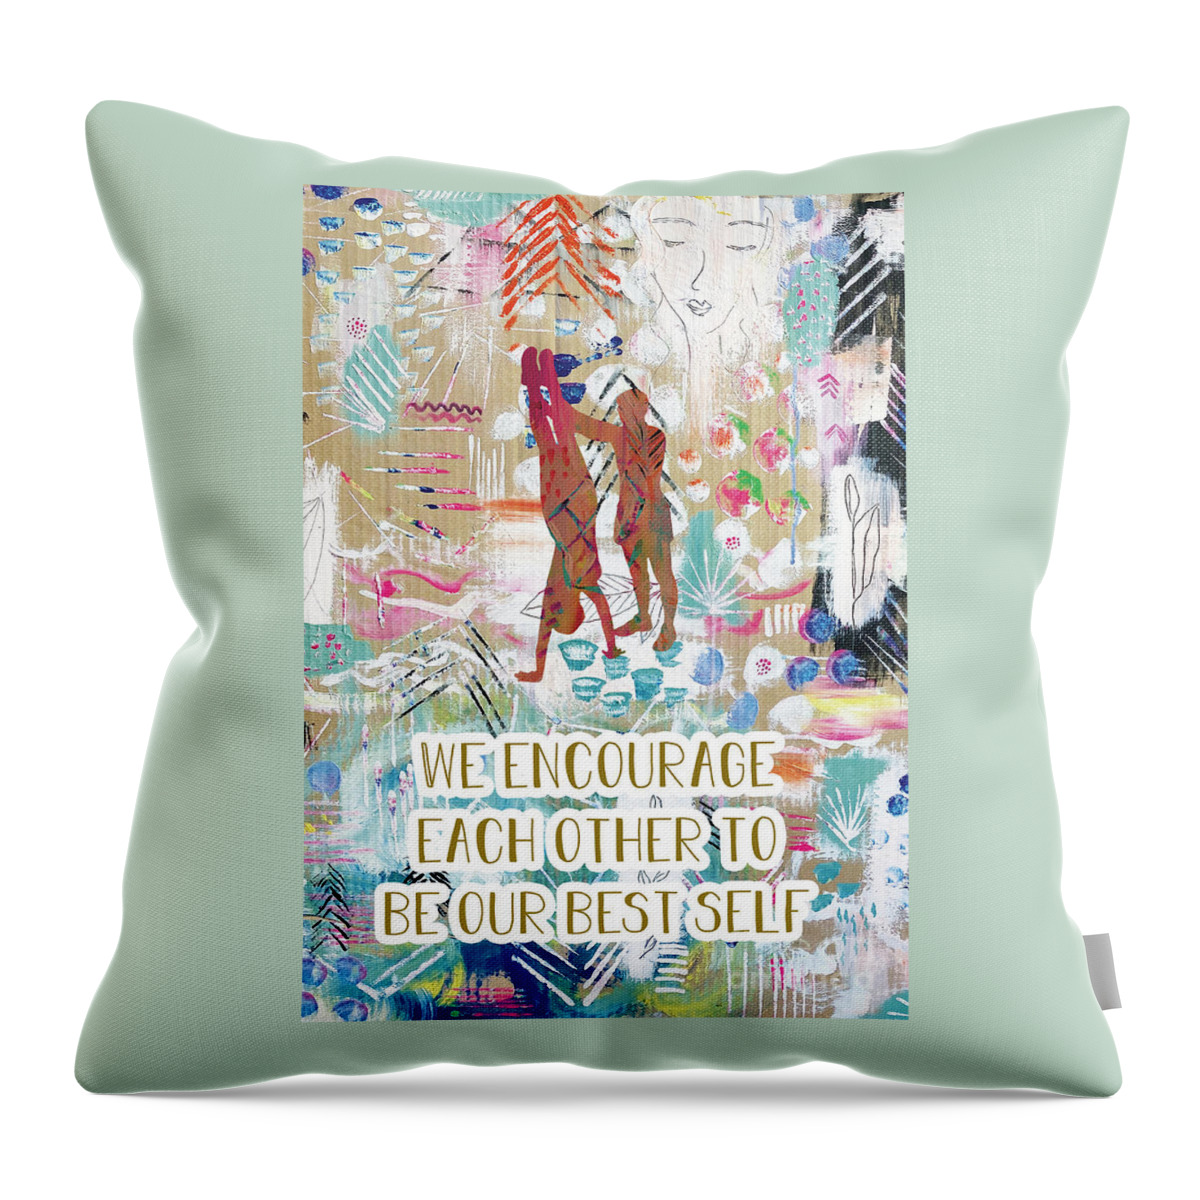 We Encourage Each Other Throw Pillow featuring the painting We encourage each other by Claudia Schoen